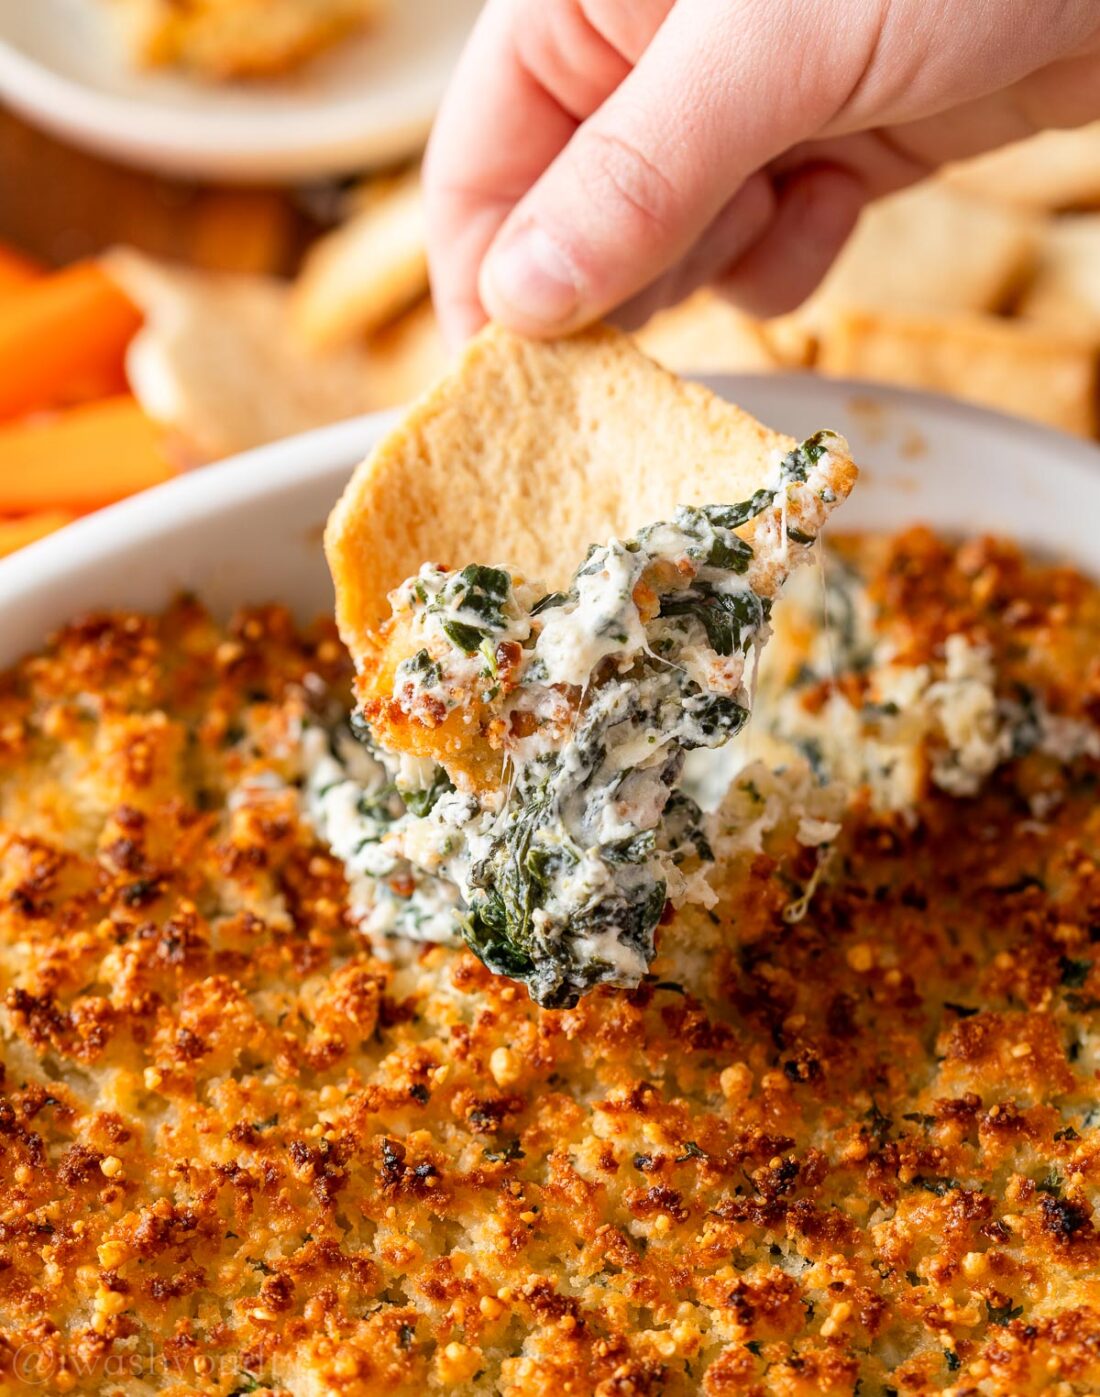 chip scooping up spinach dip in white dish.